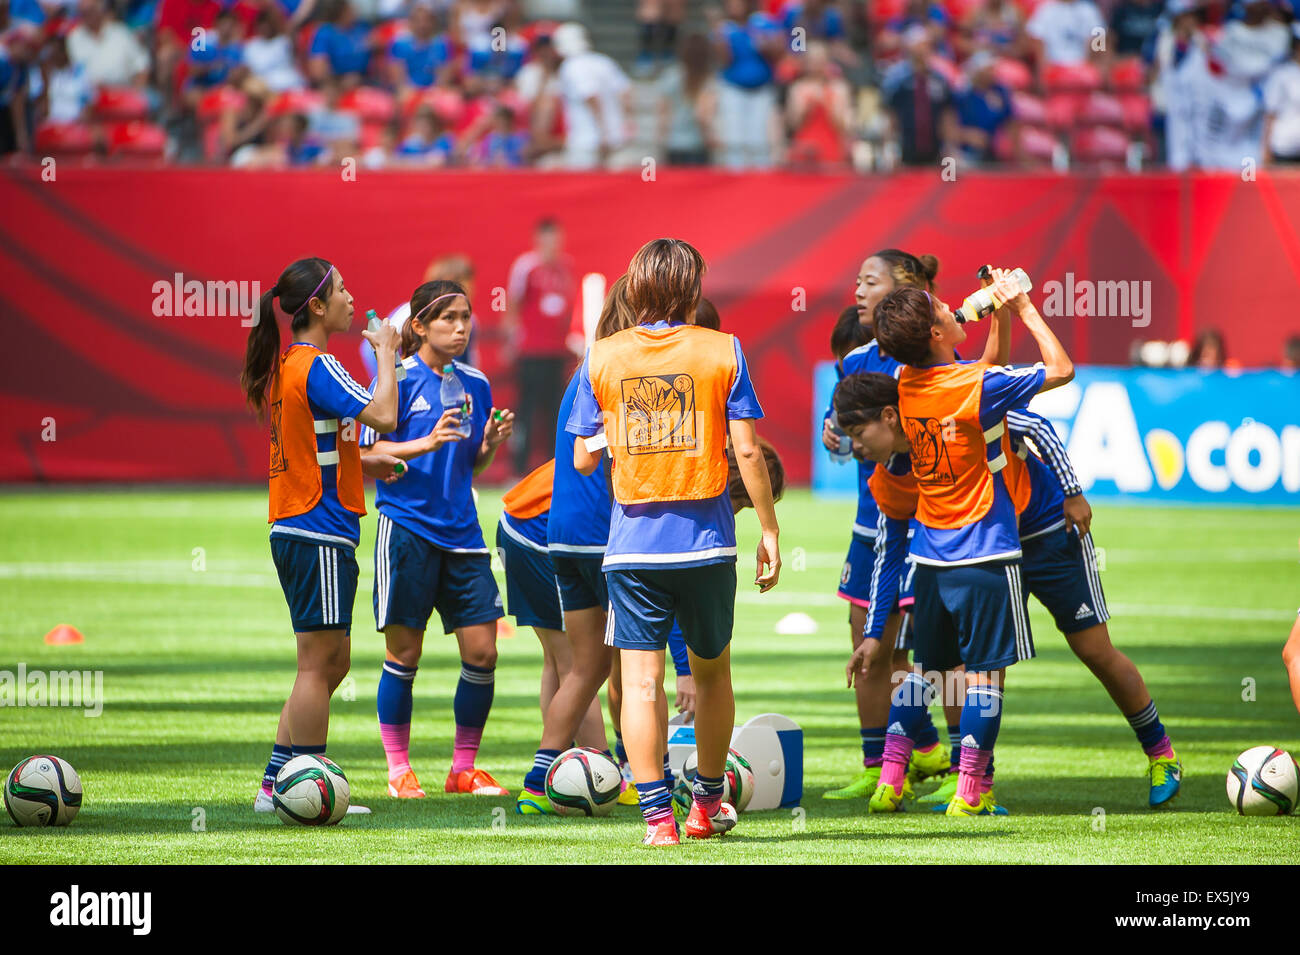 Vancouver, Canada. 5th July, 2015. Players practice ahead of the World Cup final match between the USA and Japan at the FIFA Women's World Cup Canada 2015 at BC Place Stadium. USA won the match 5-2. © Matt Jacques/Alamy Live News Credit:  Matt Jacques/Alamy Live News Stock Photo